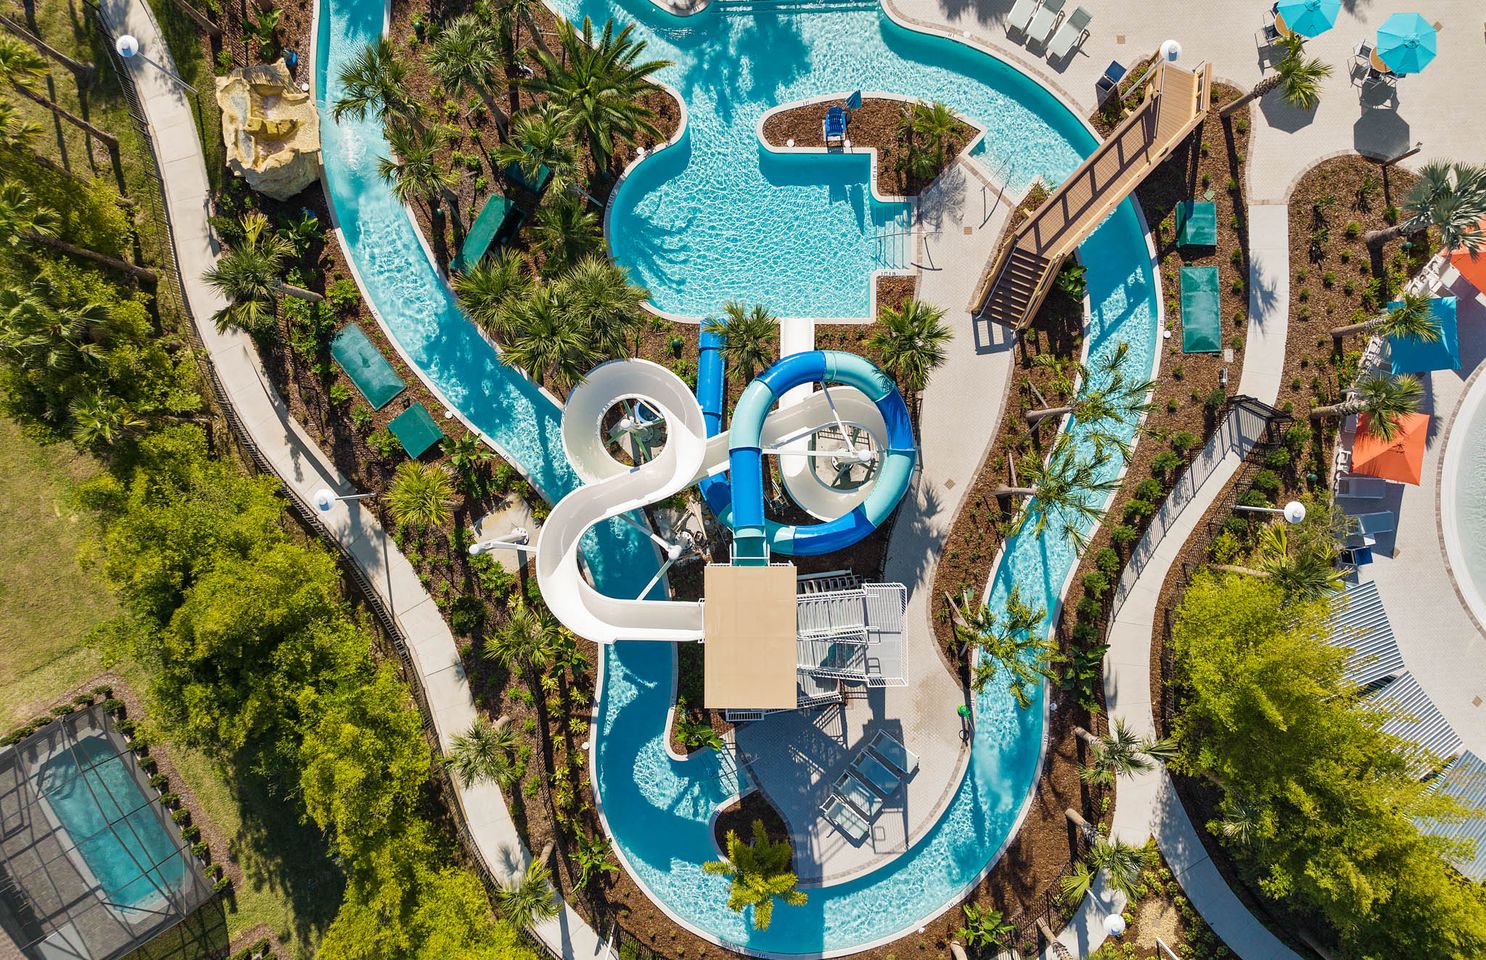 overhead view of double flume waterslide that empties into a lazy river